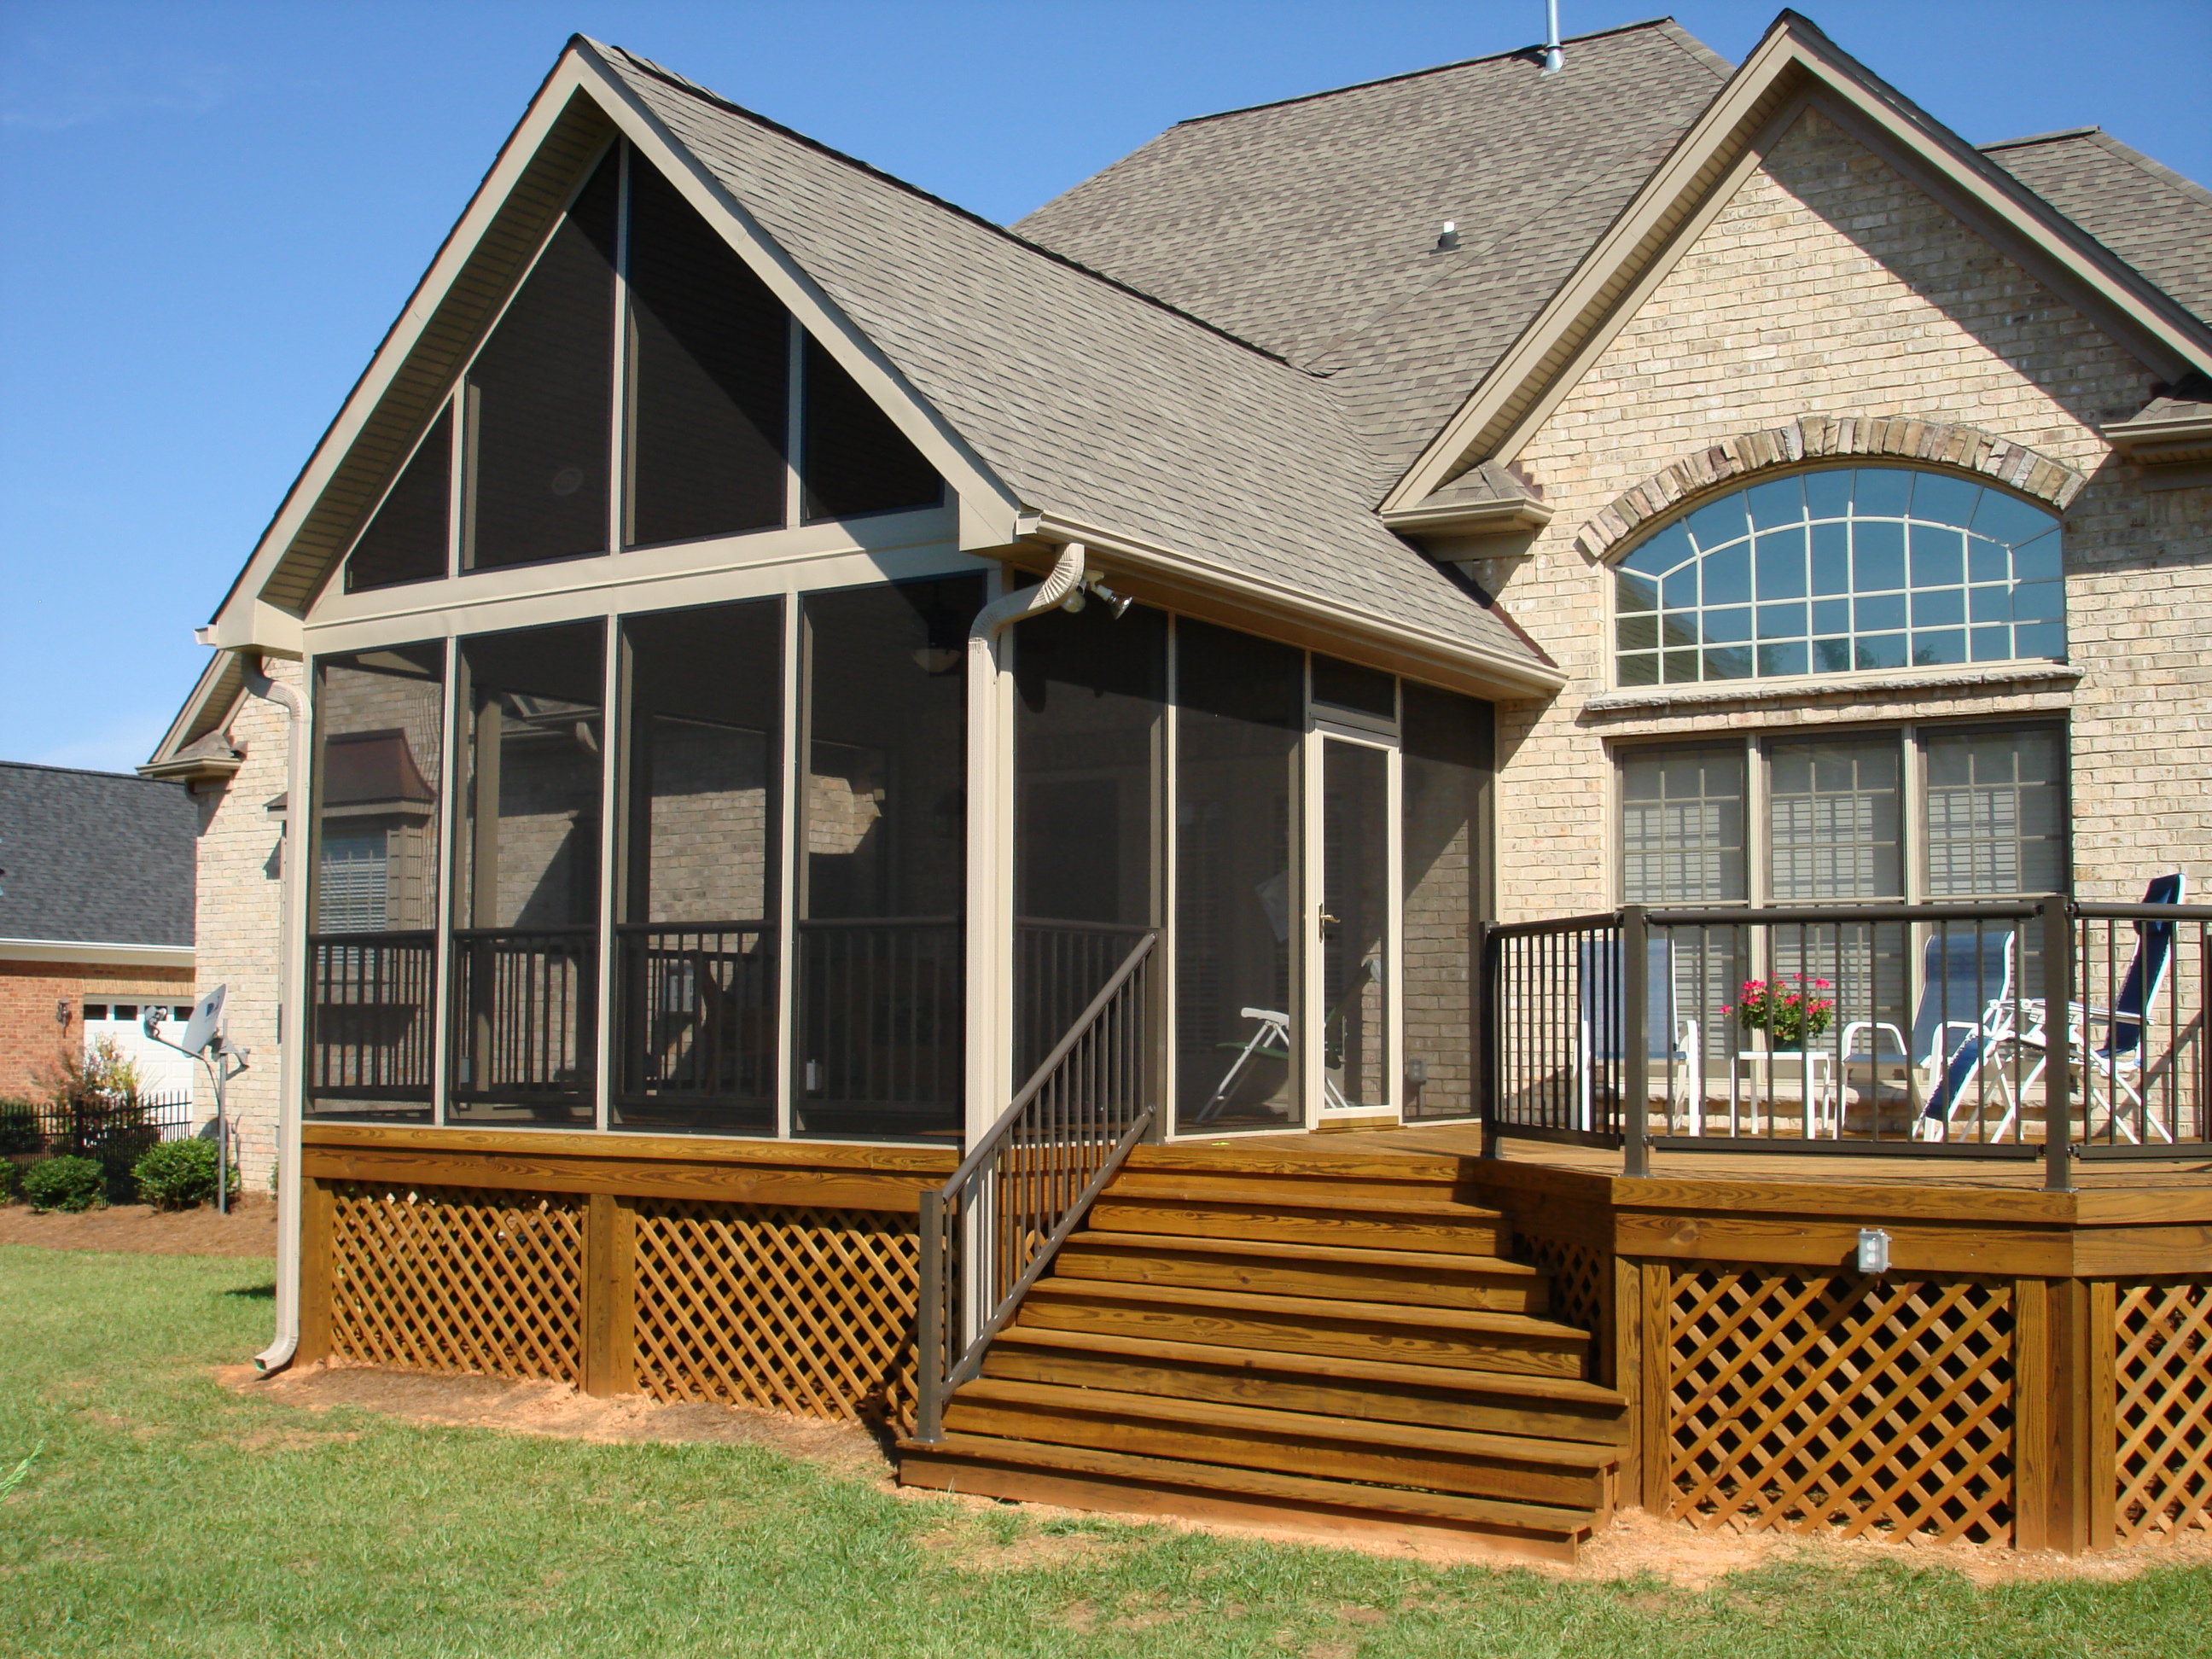 Top 5 Reasons to Build a Screened Porch in 2010 